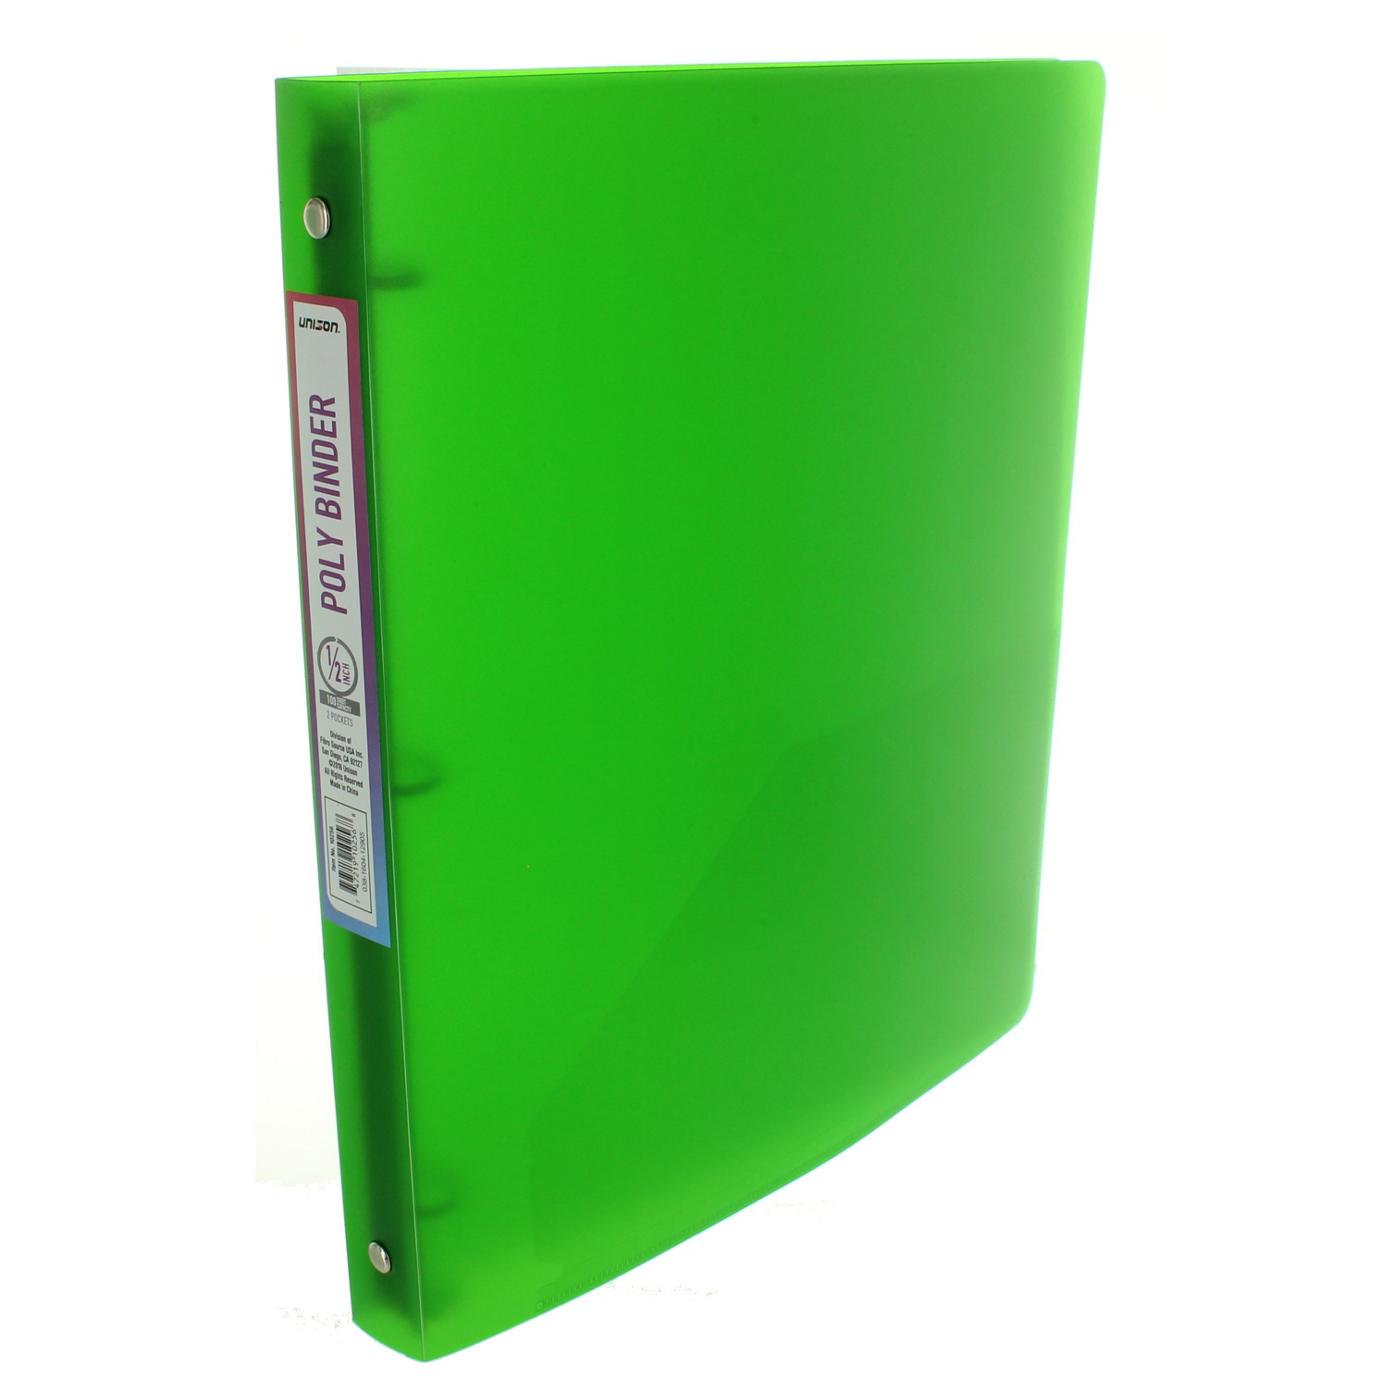 Unison Poly Binder With Pockets; image 2 of 4